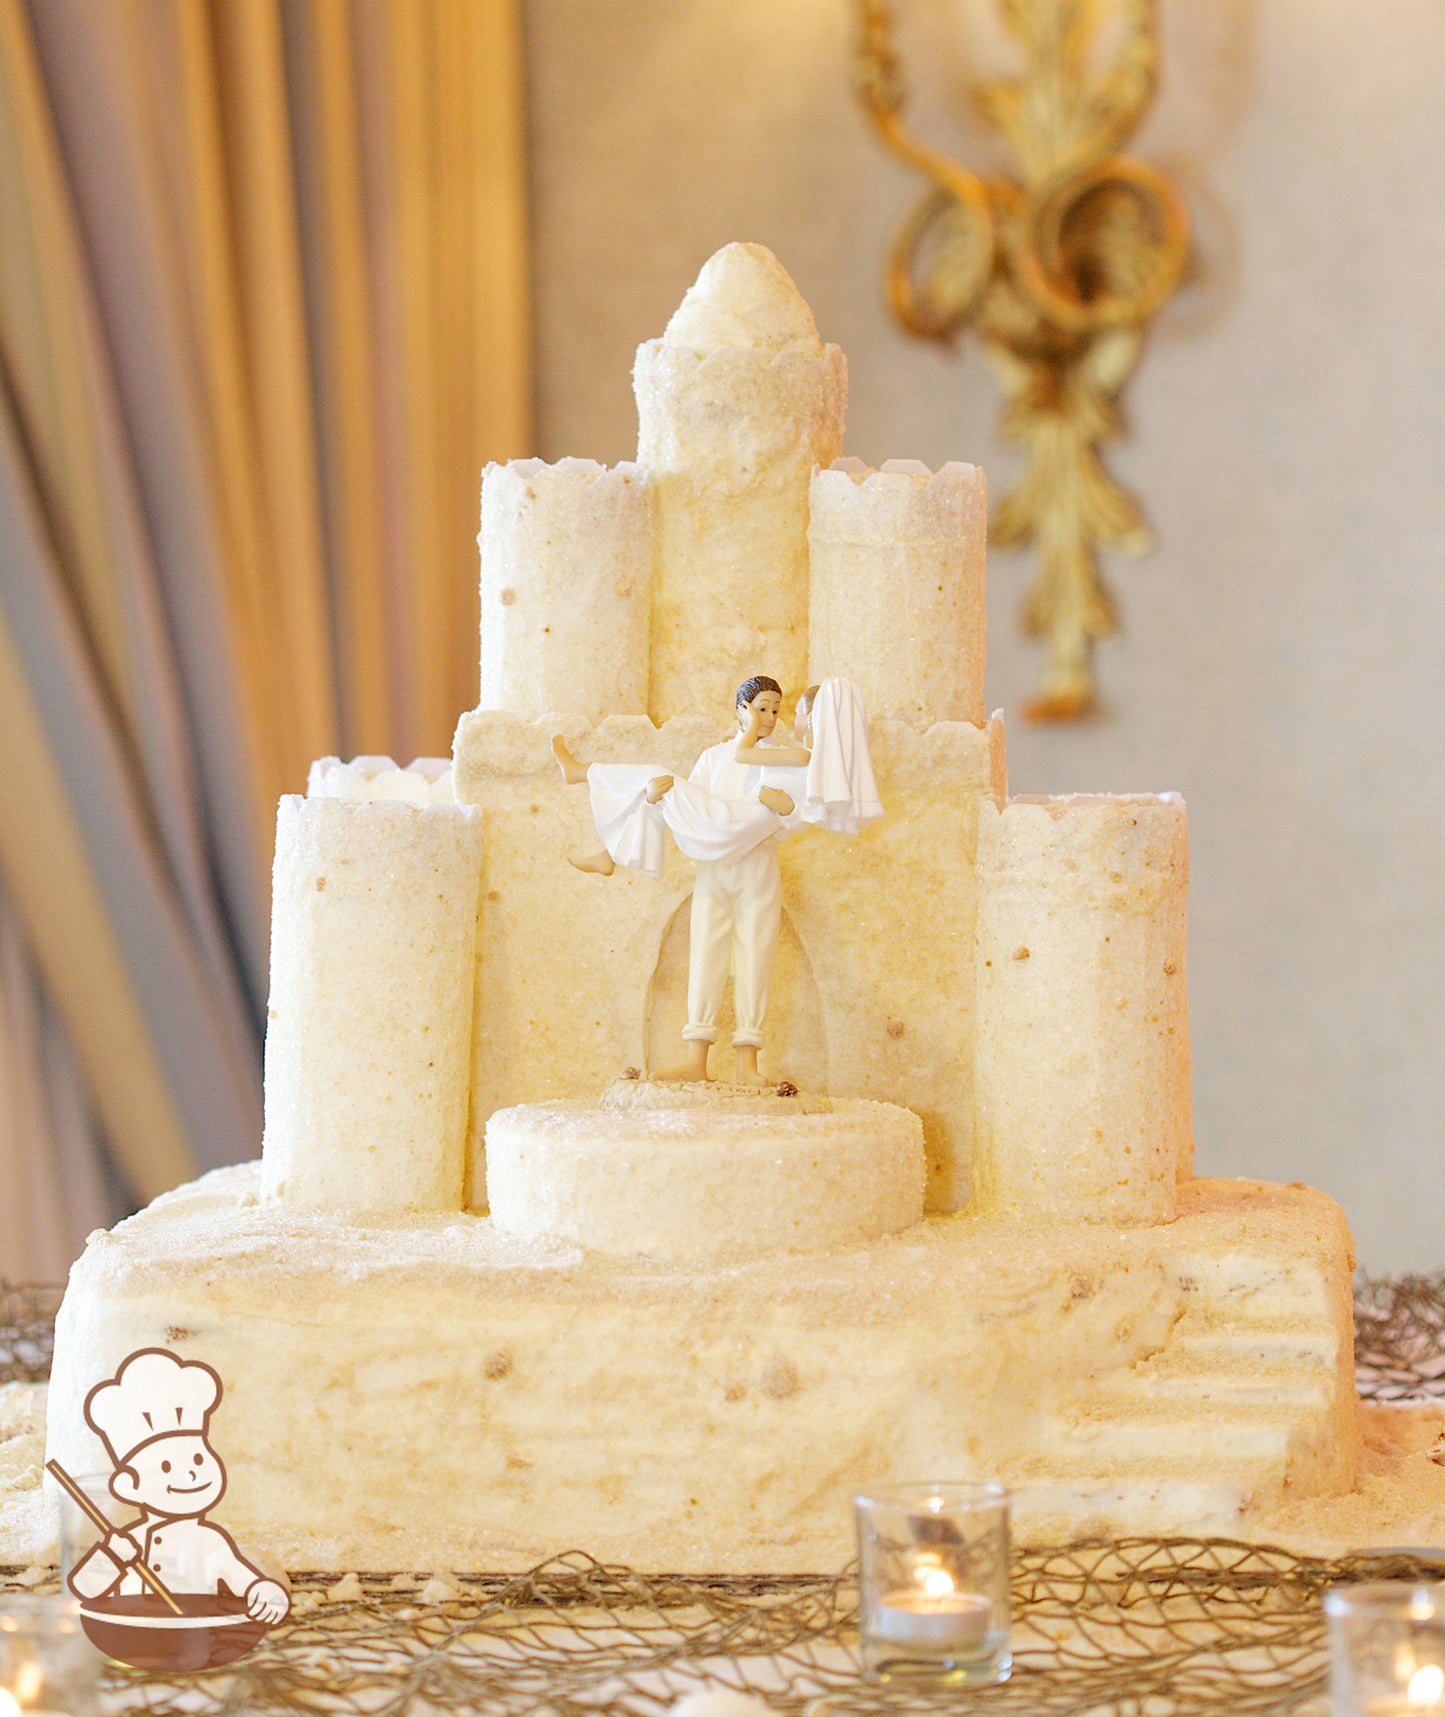 Cake decorated to look like a sandcastle by being coated with sugar "sand" and sugar crystals with a plastic topper of a couple getting married.